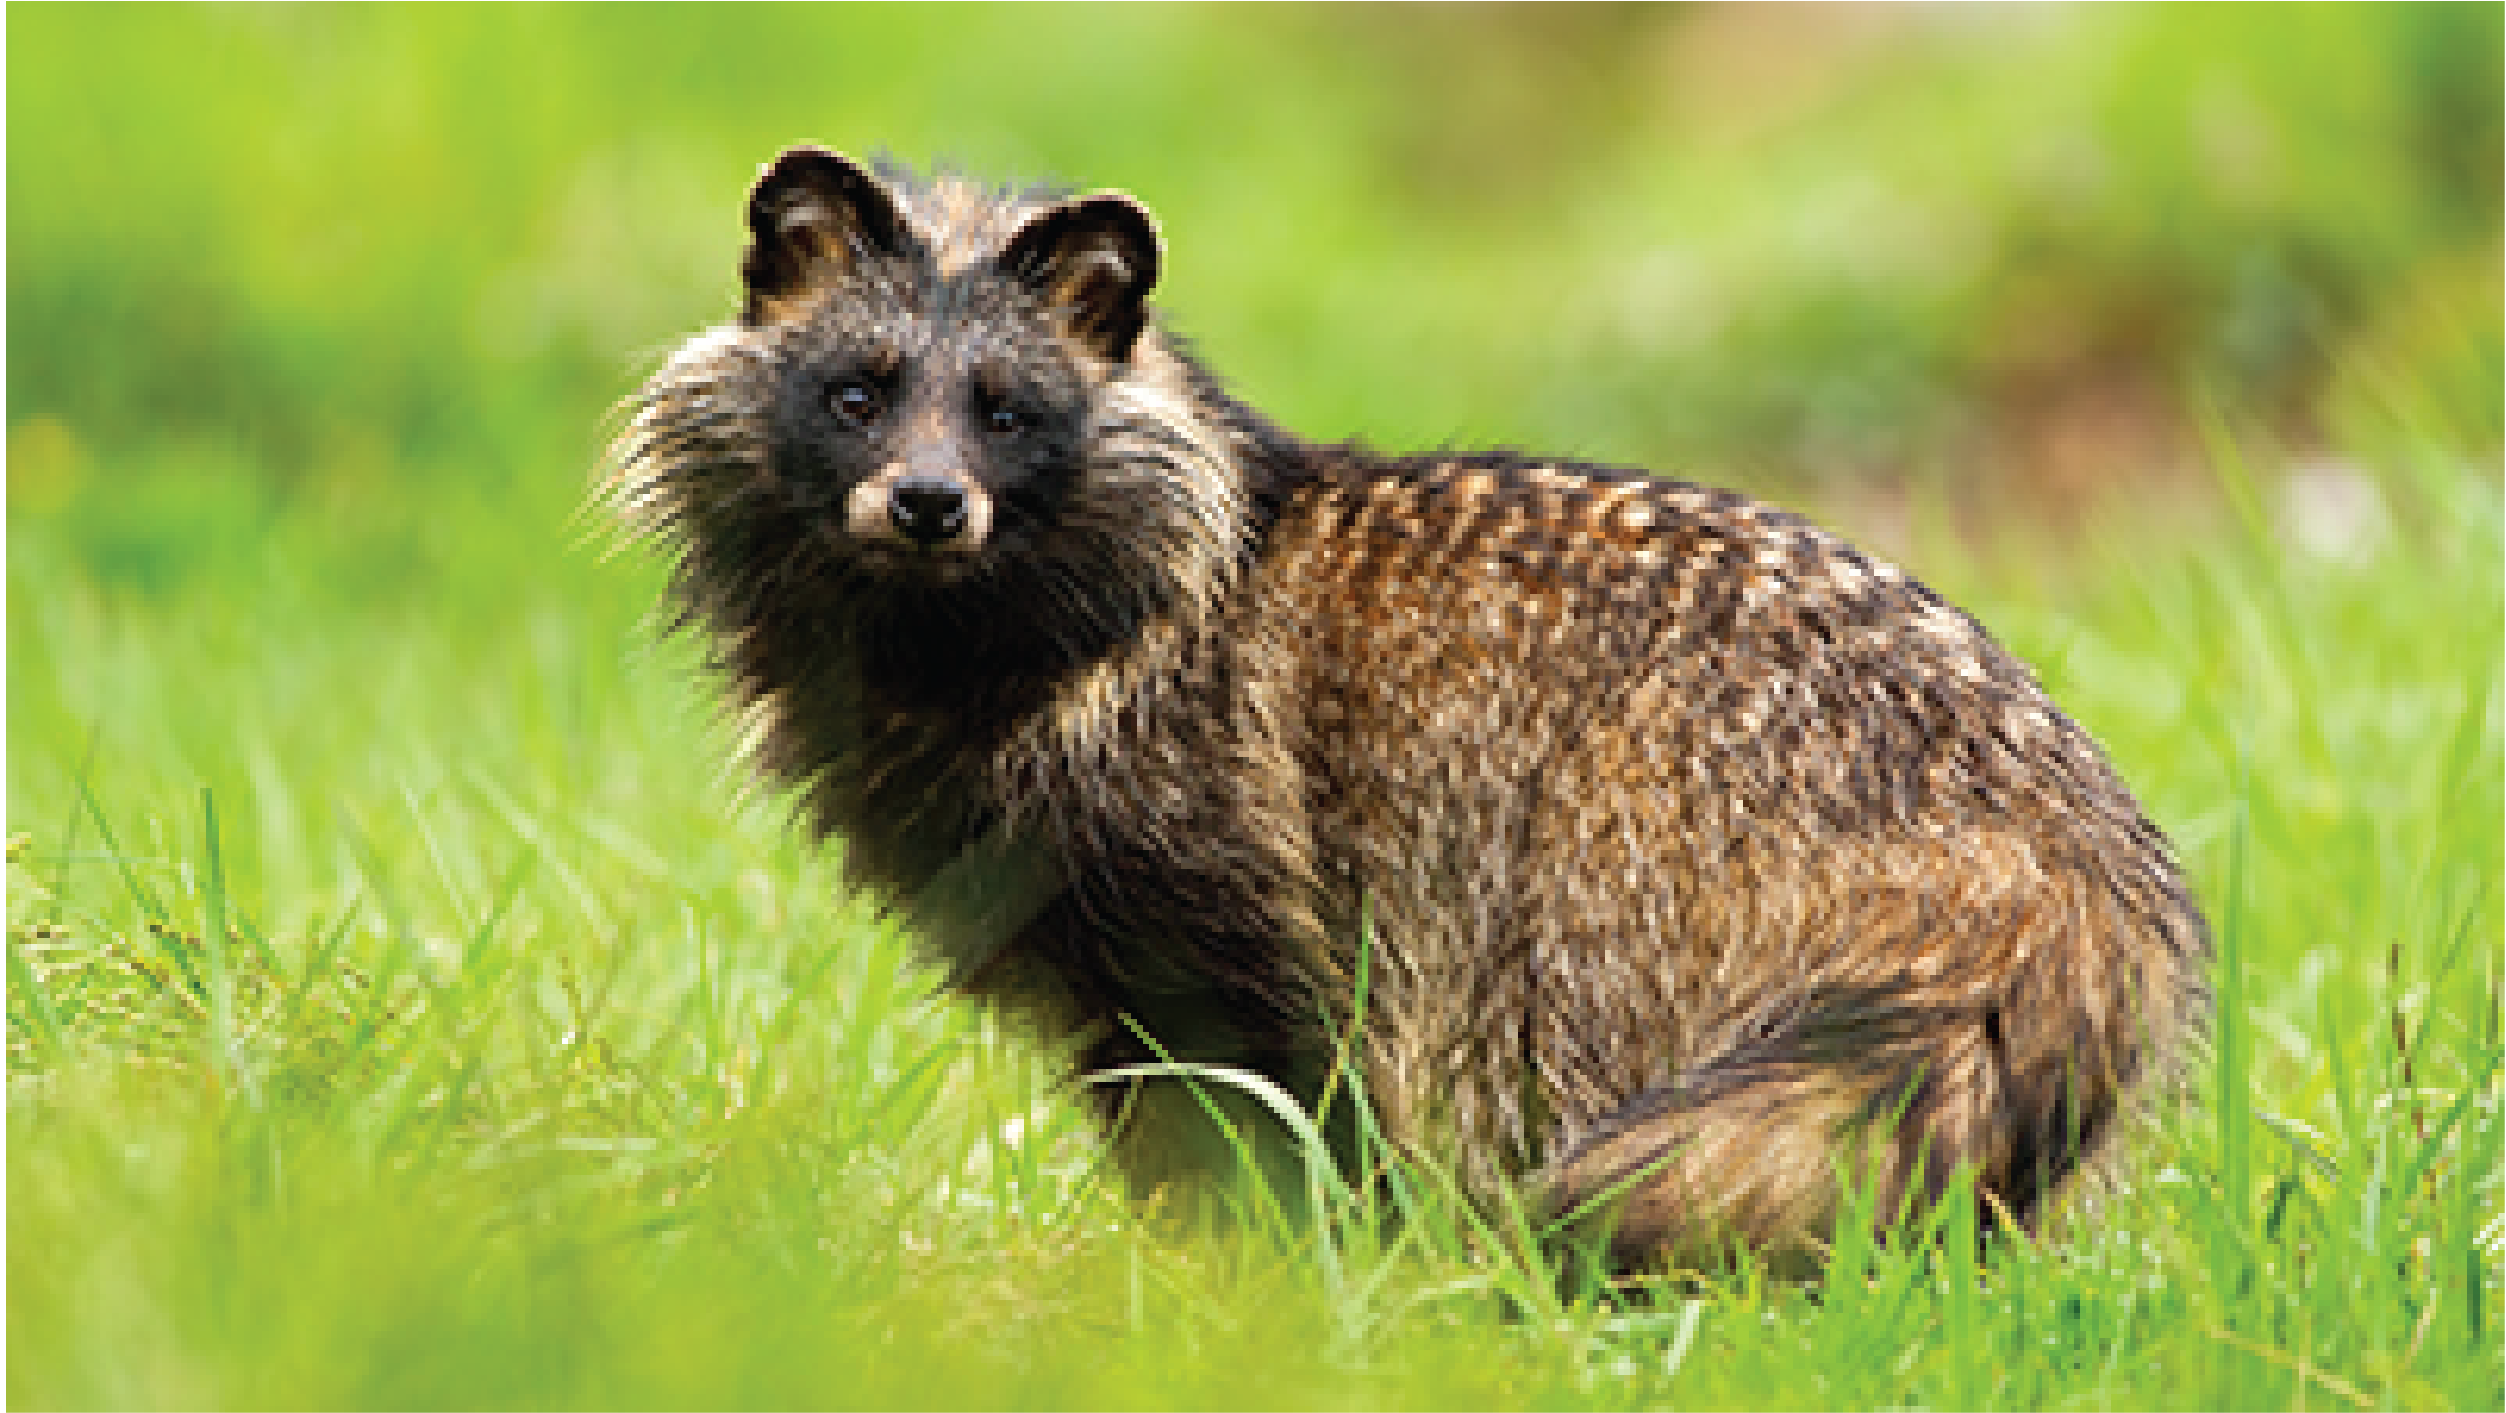 COVID origins: Was it a Racoon Dog?